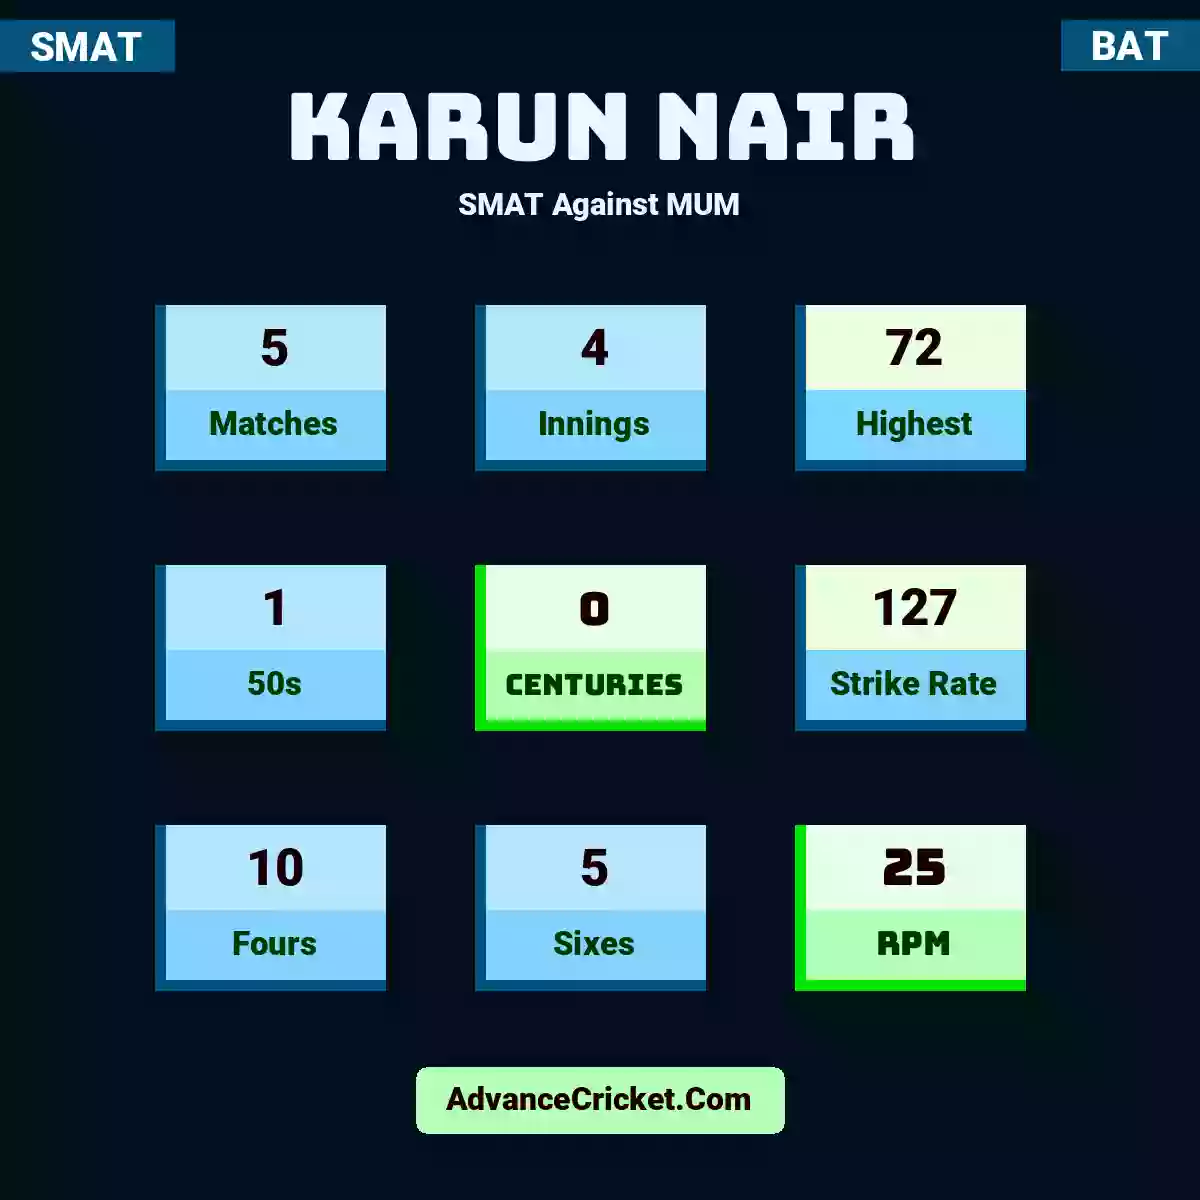 Karun Nair SMAT  Against MUM, Karun Nair played 5 matches, scored 72 runs as highest, 1 half-centuries, and 0 centuries, with a strike rate of 127. K.Nair hit 10 fours and 5 sixes, with an RPM of 25.